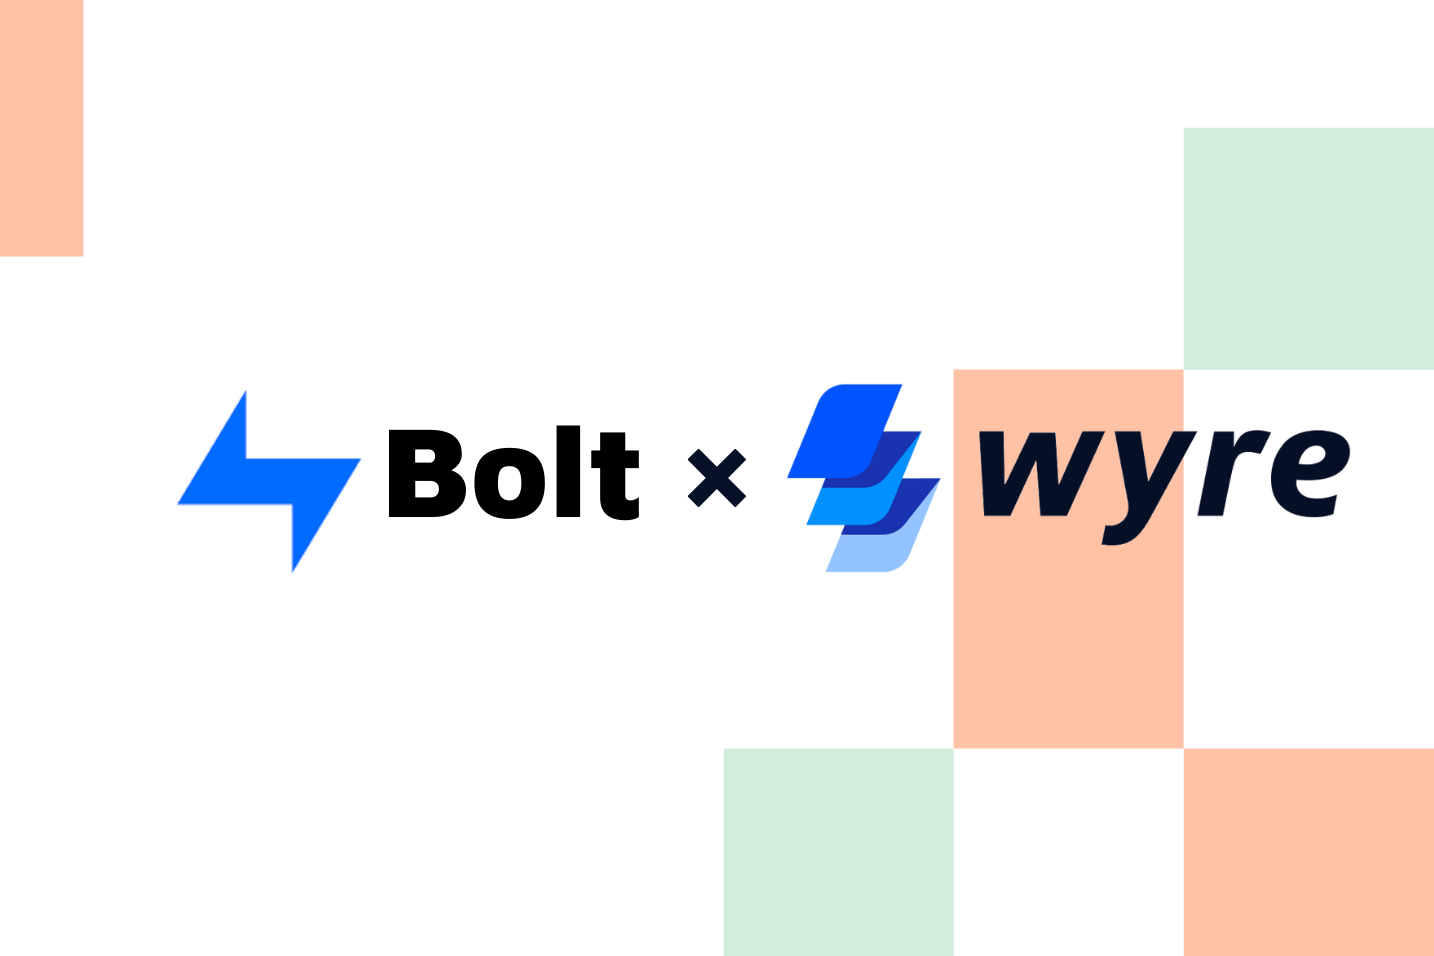 Bolt mua lai Wyre voi gia 1,5 ty USD – thuong vu M&A lon nhat lich su nganh Crypto - anh 1